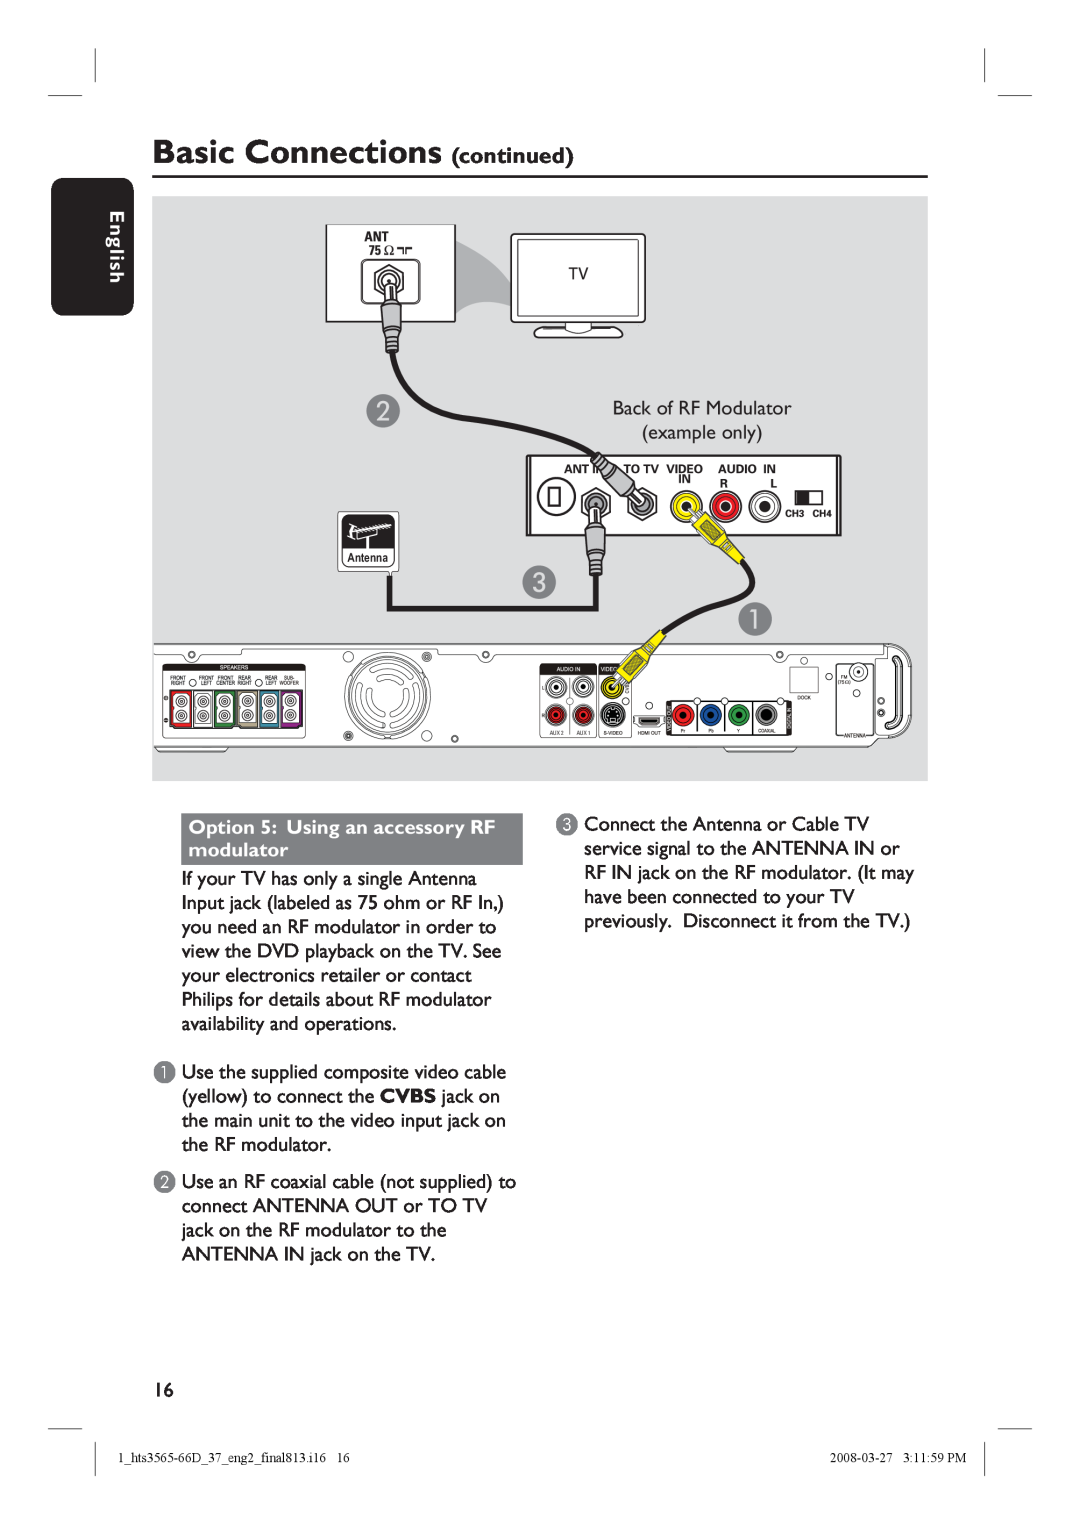 Philips HTS3565D quick start Basic Connections continued, English, Option 5 Using an accessory RF modulator 